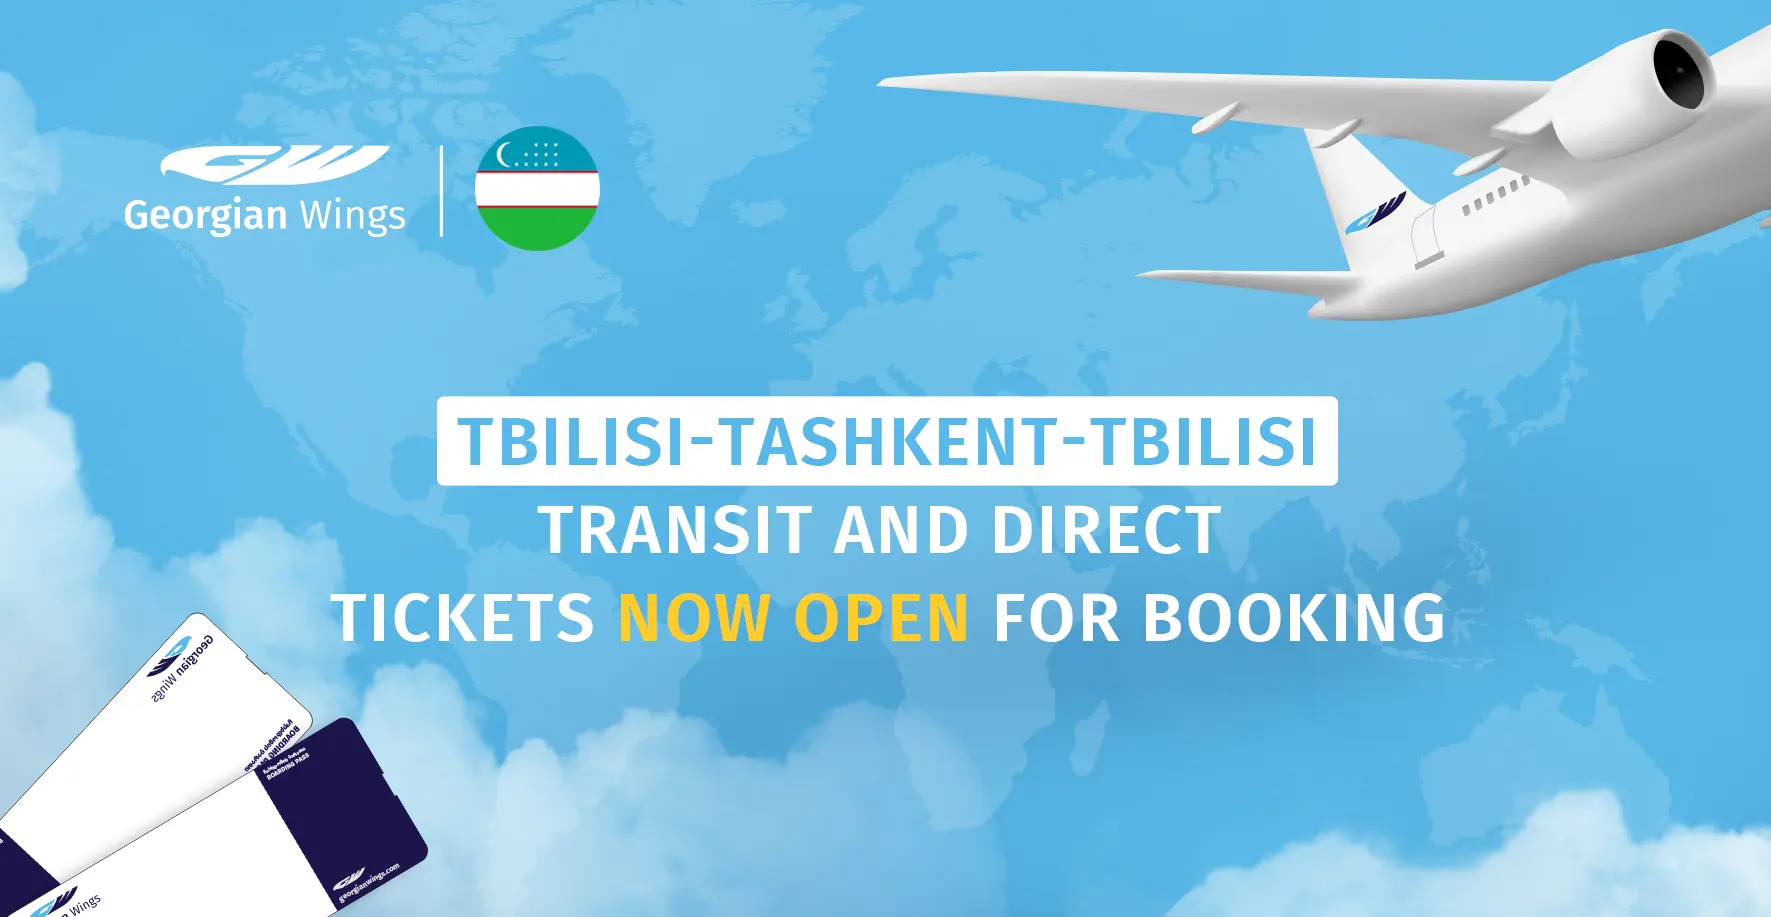 German Airline Company to offer direct flights to Tbilisi